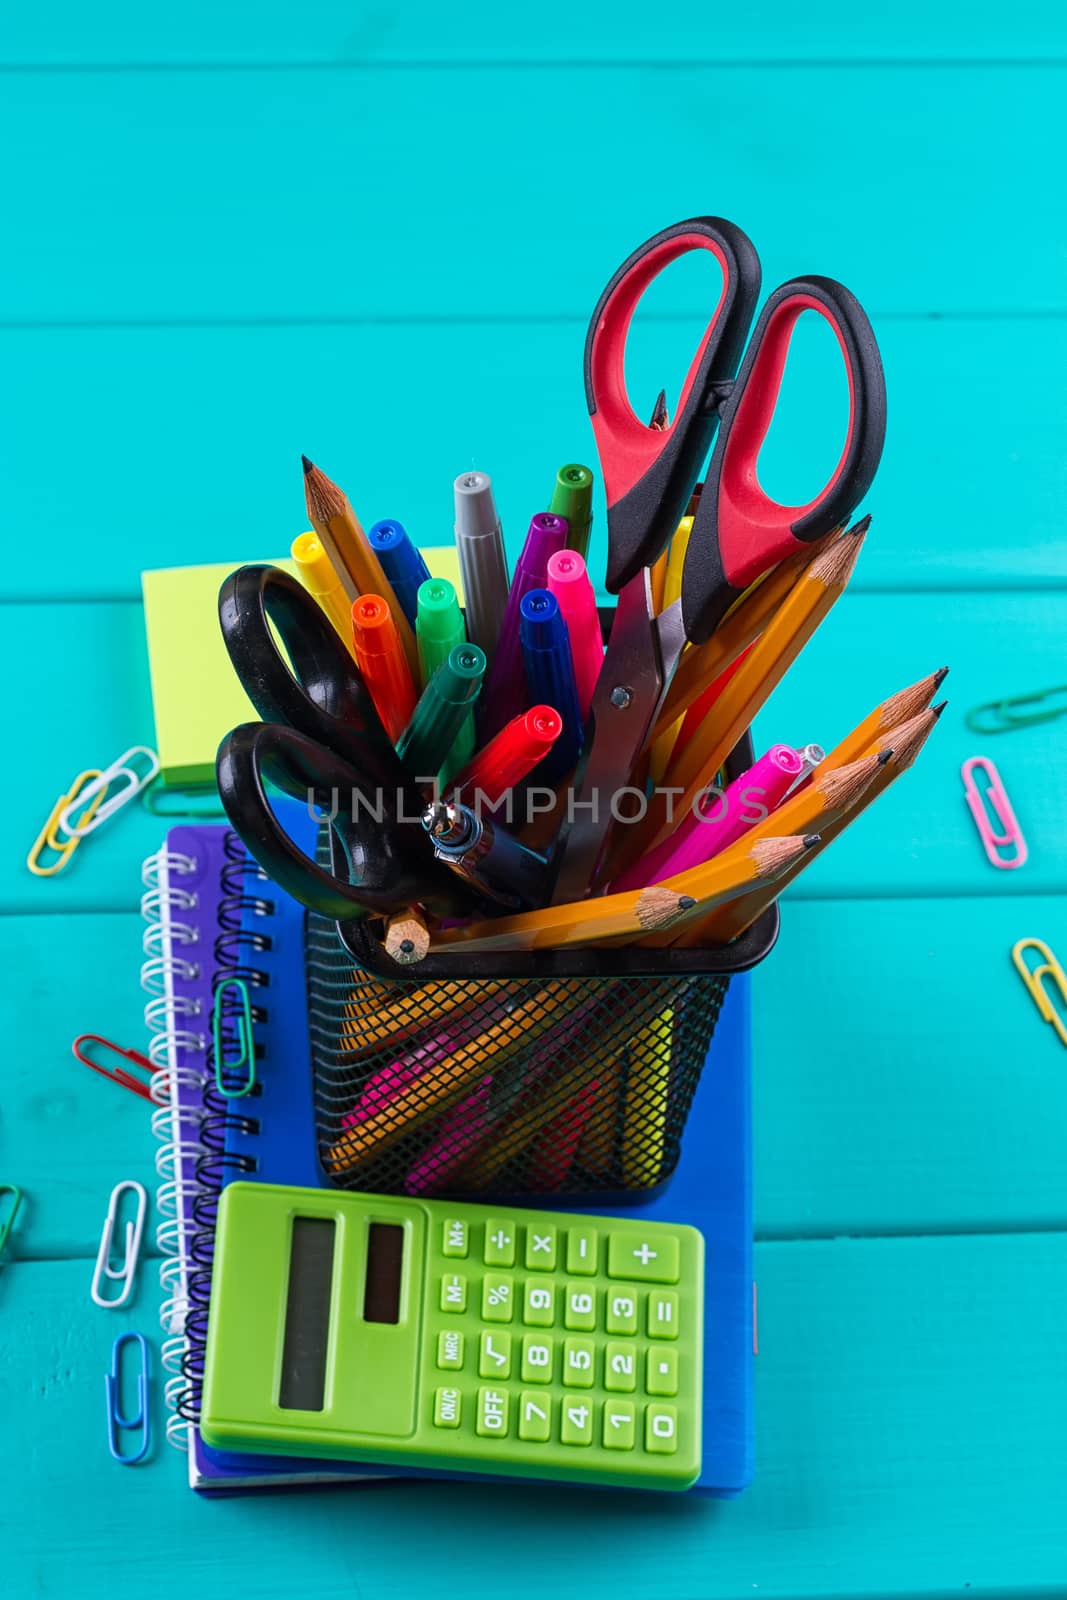 school and office supplies by victosha